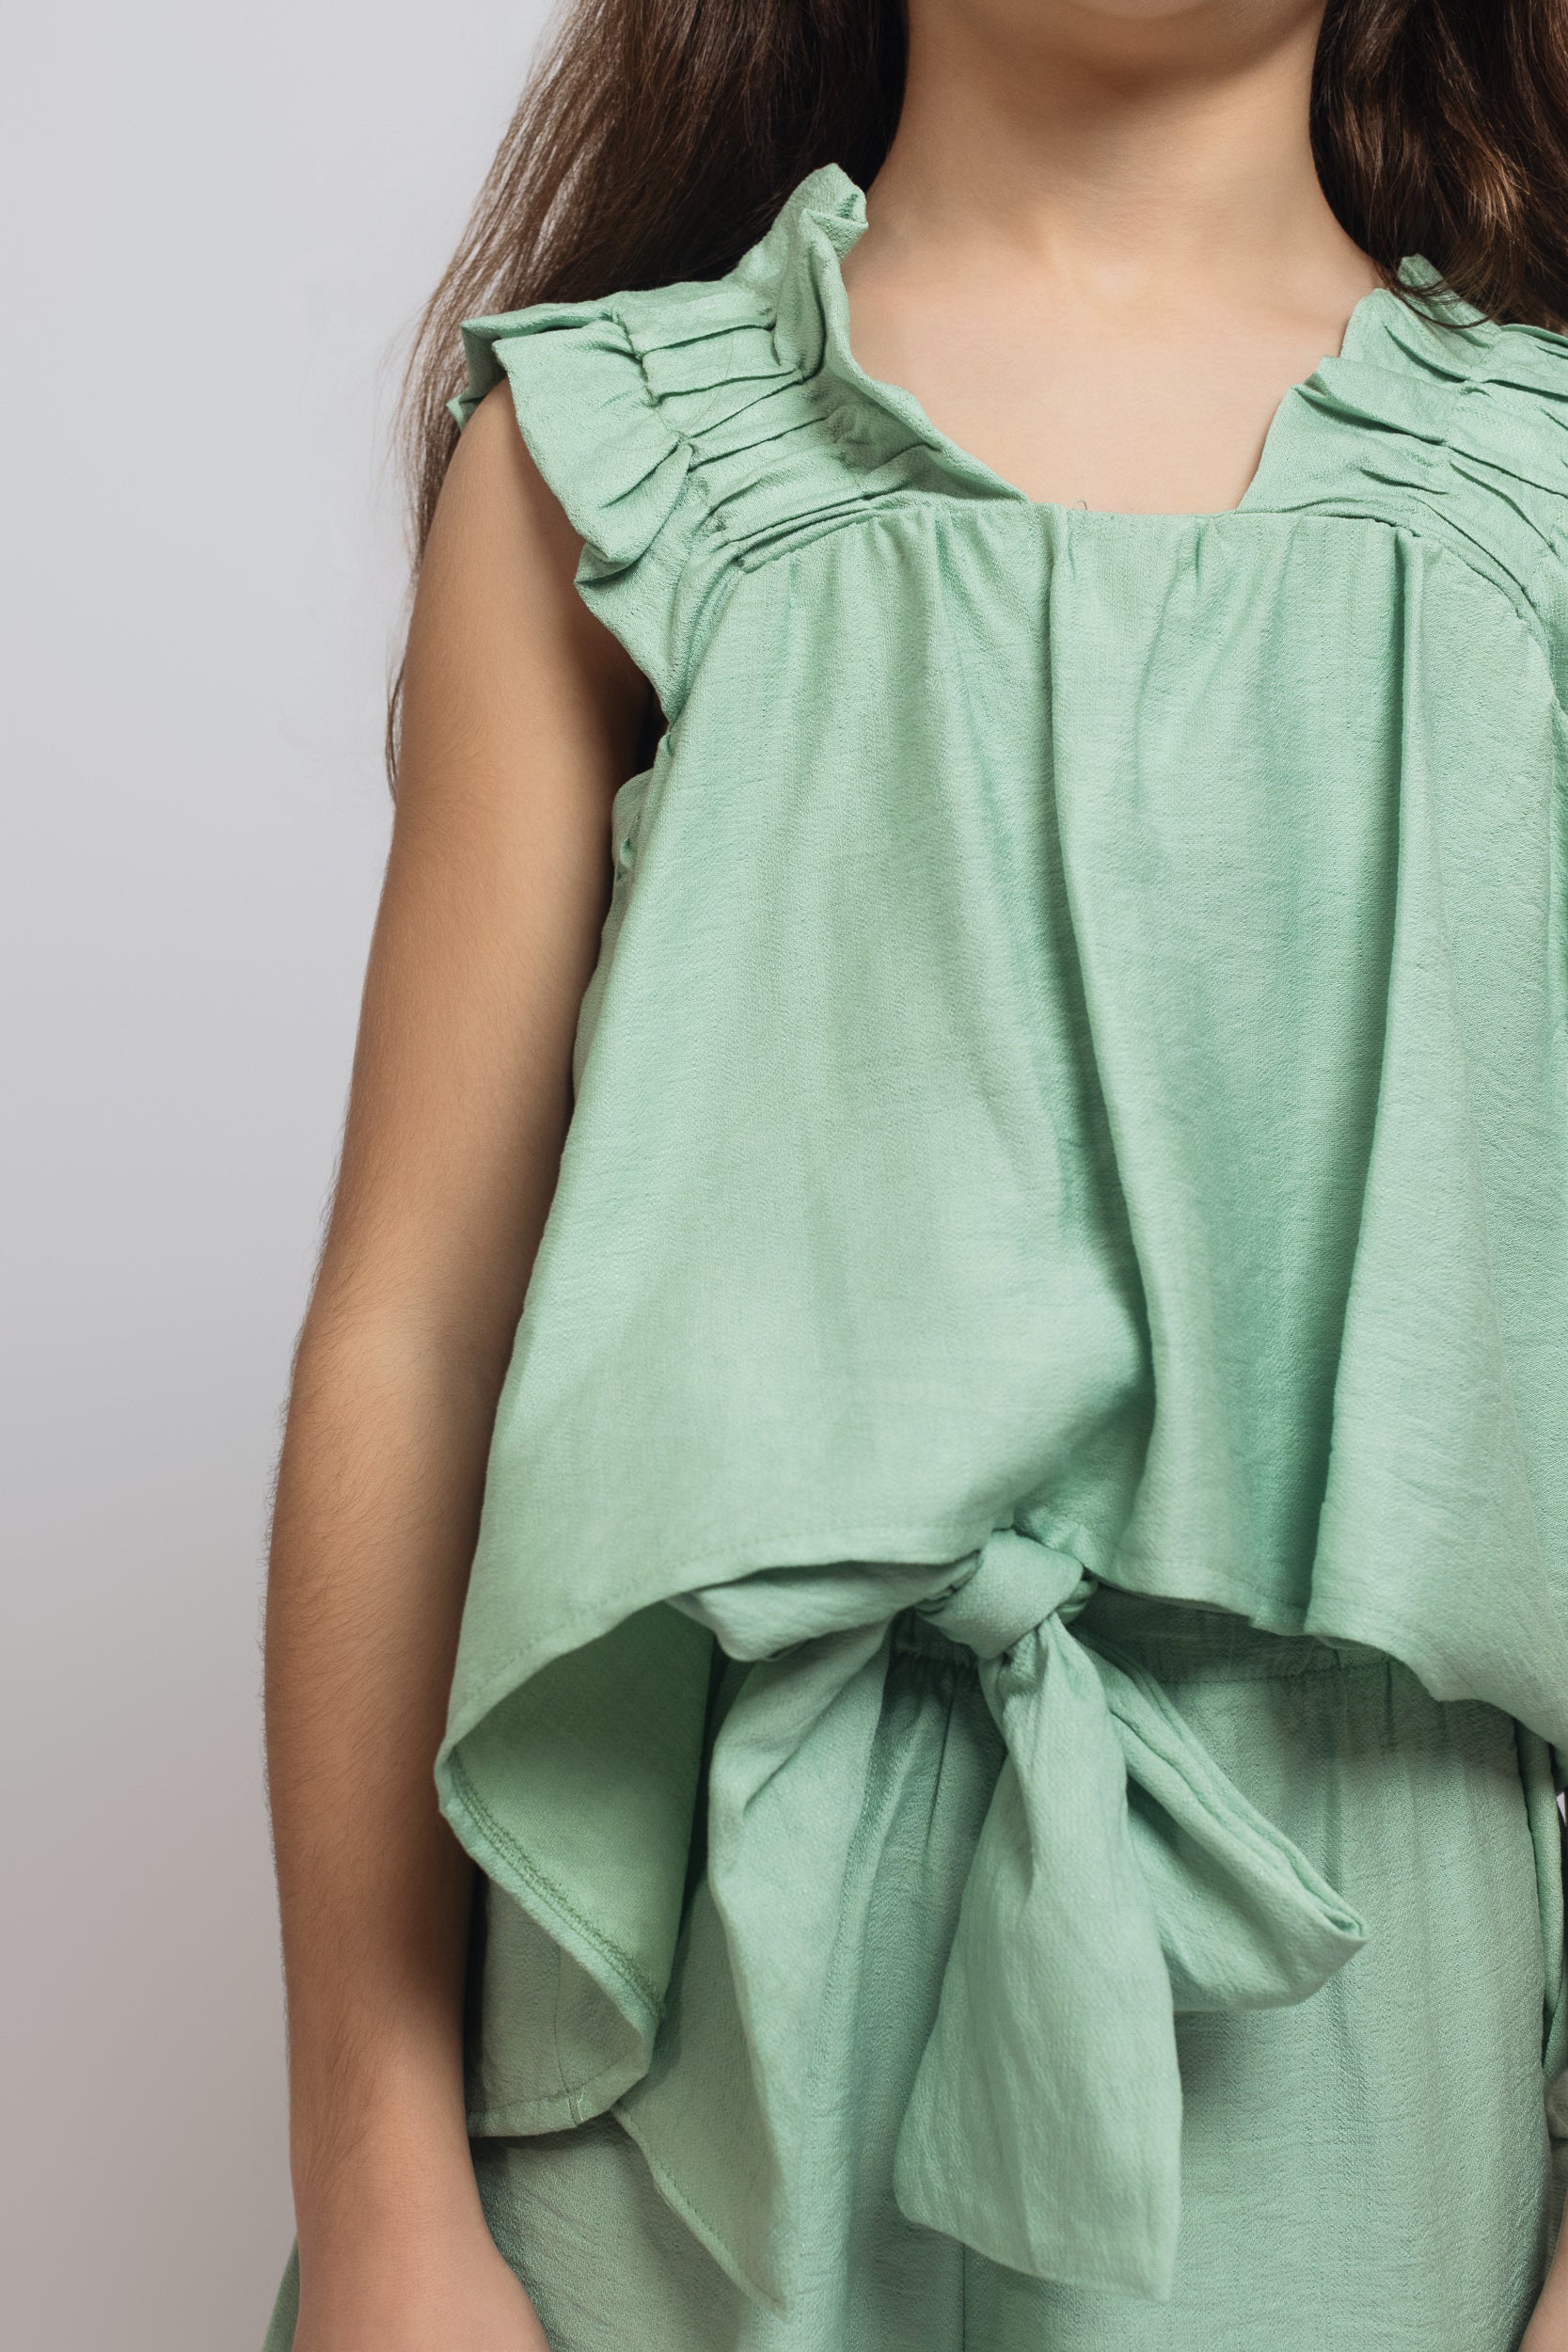 Ruffled Top with Short Set For Girls - Mint Green